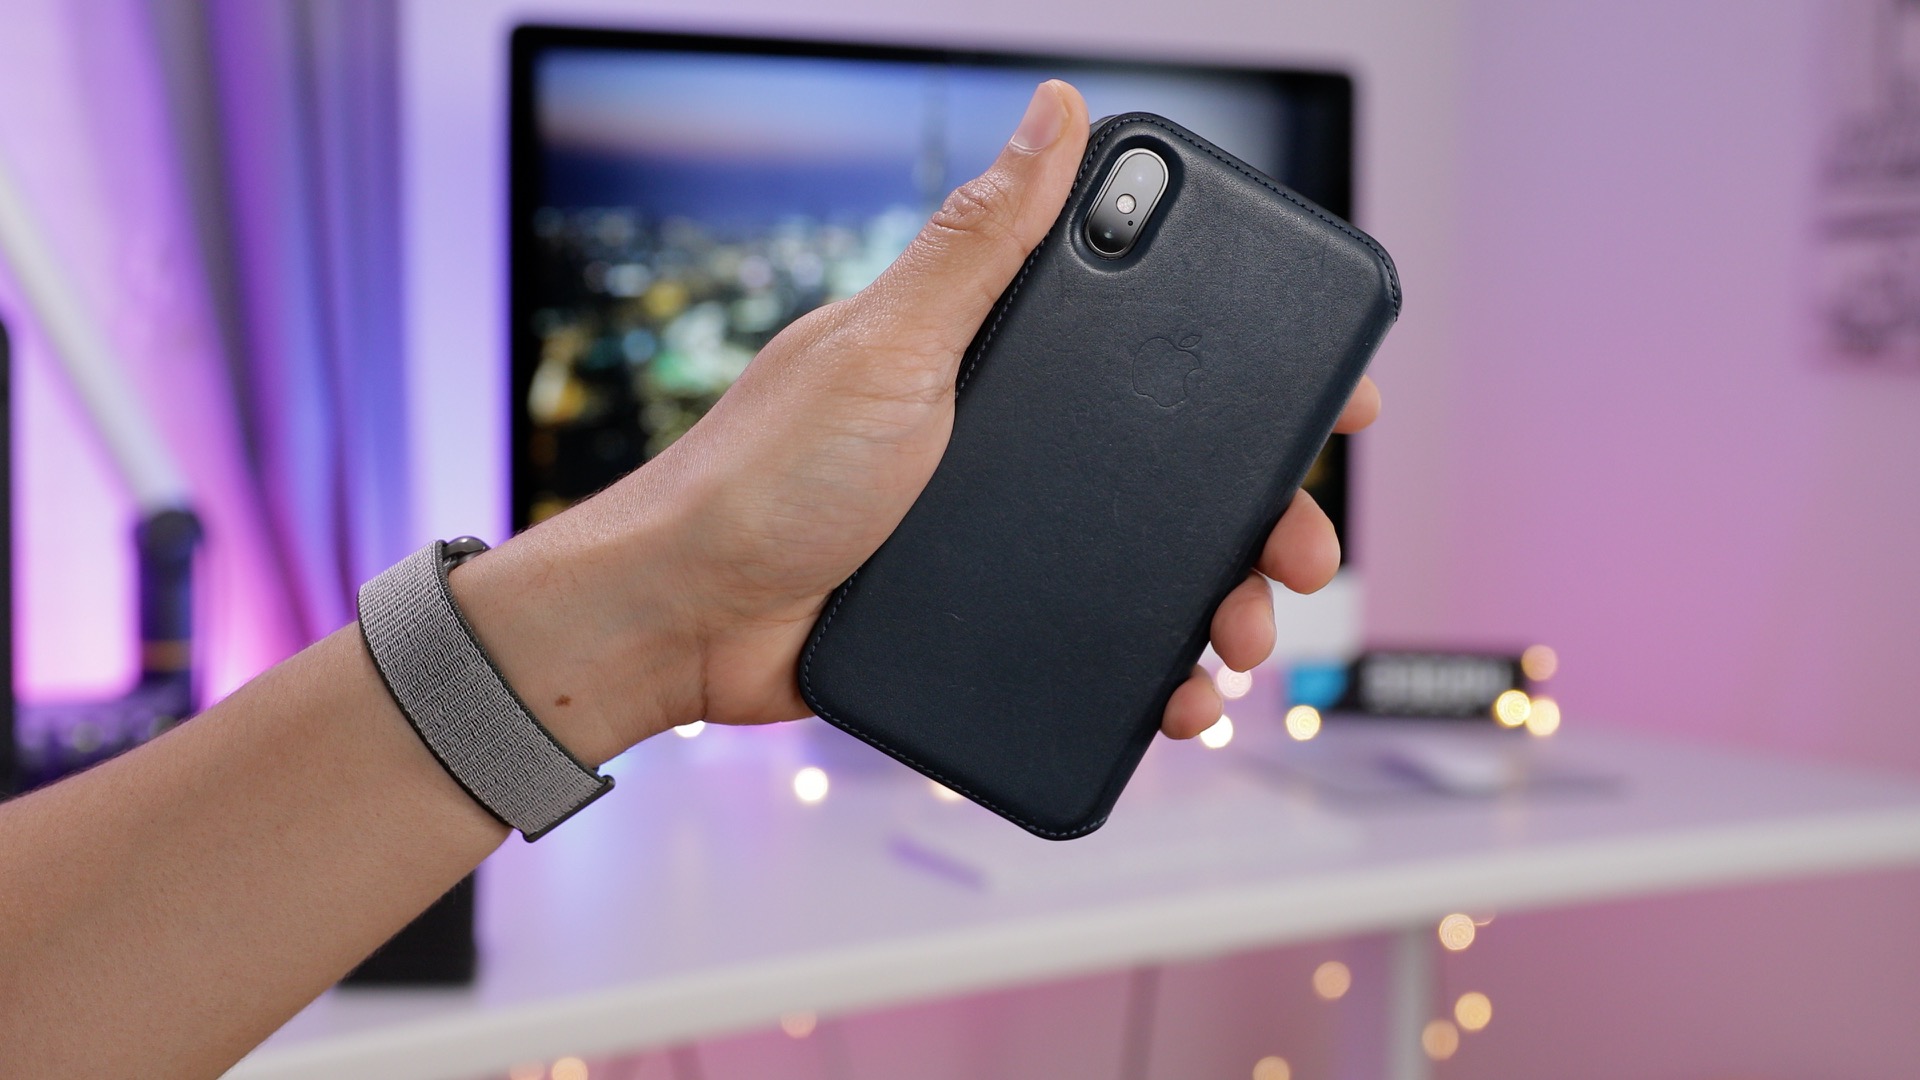 Hands-on: iPhone X Leather Folio - A Smart Case for your iPhone X? 